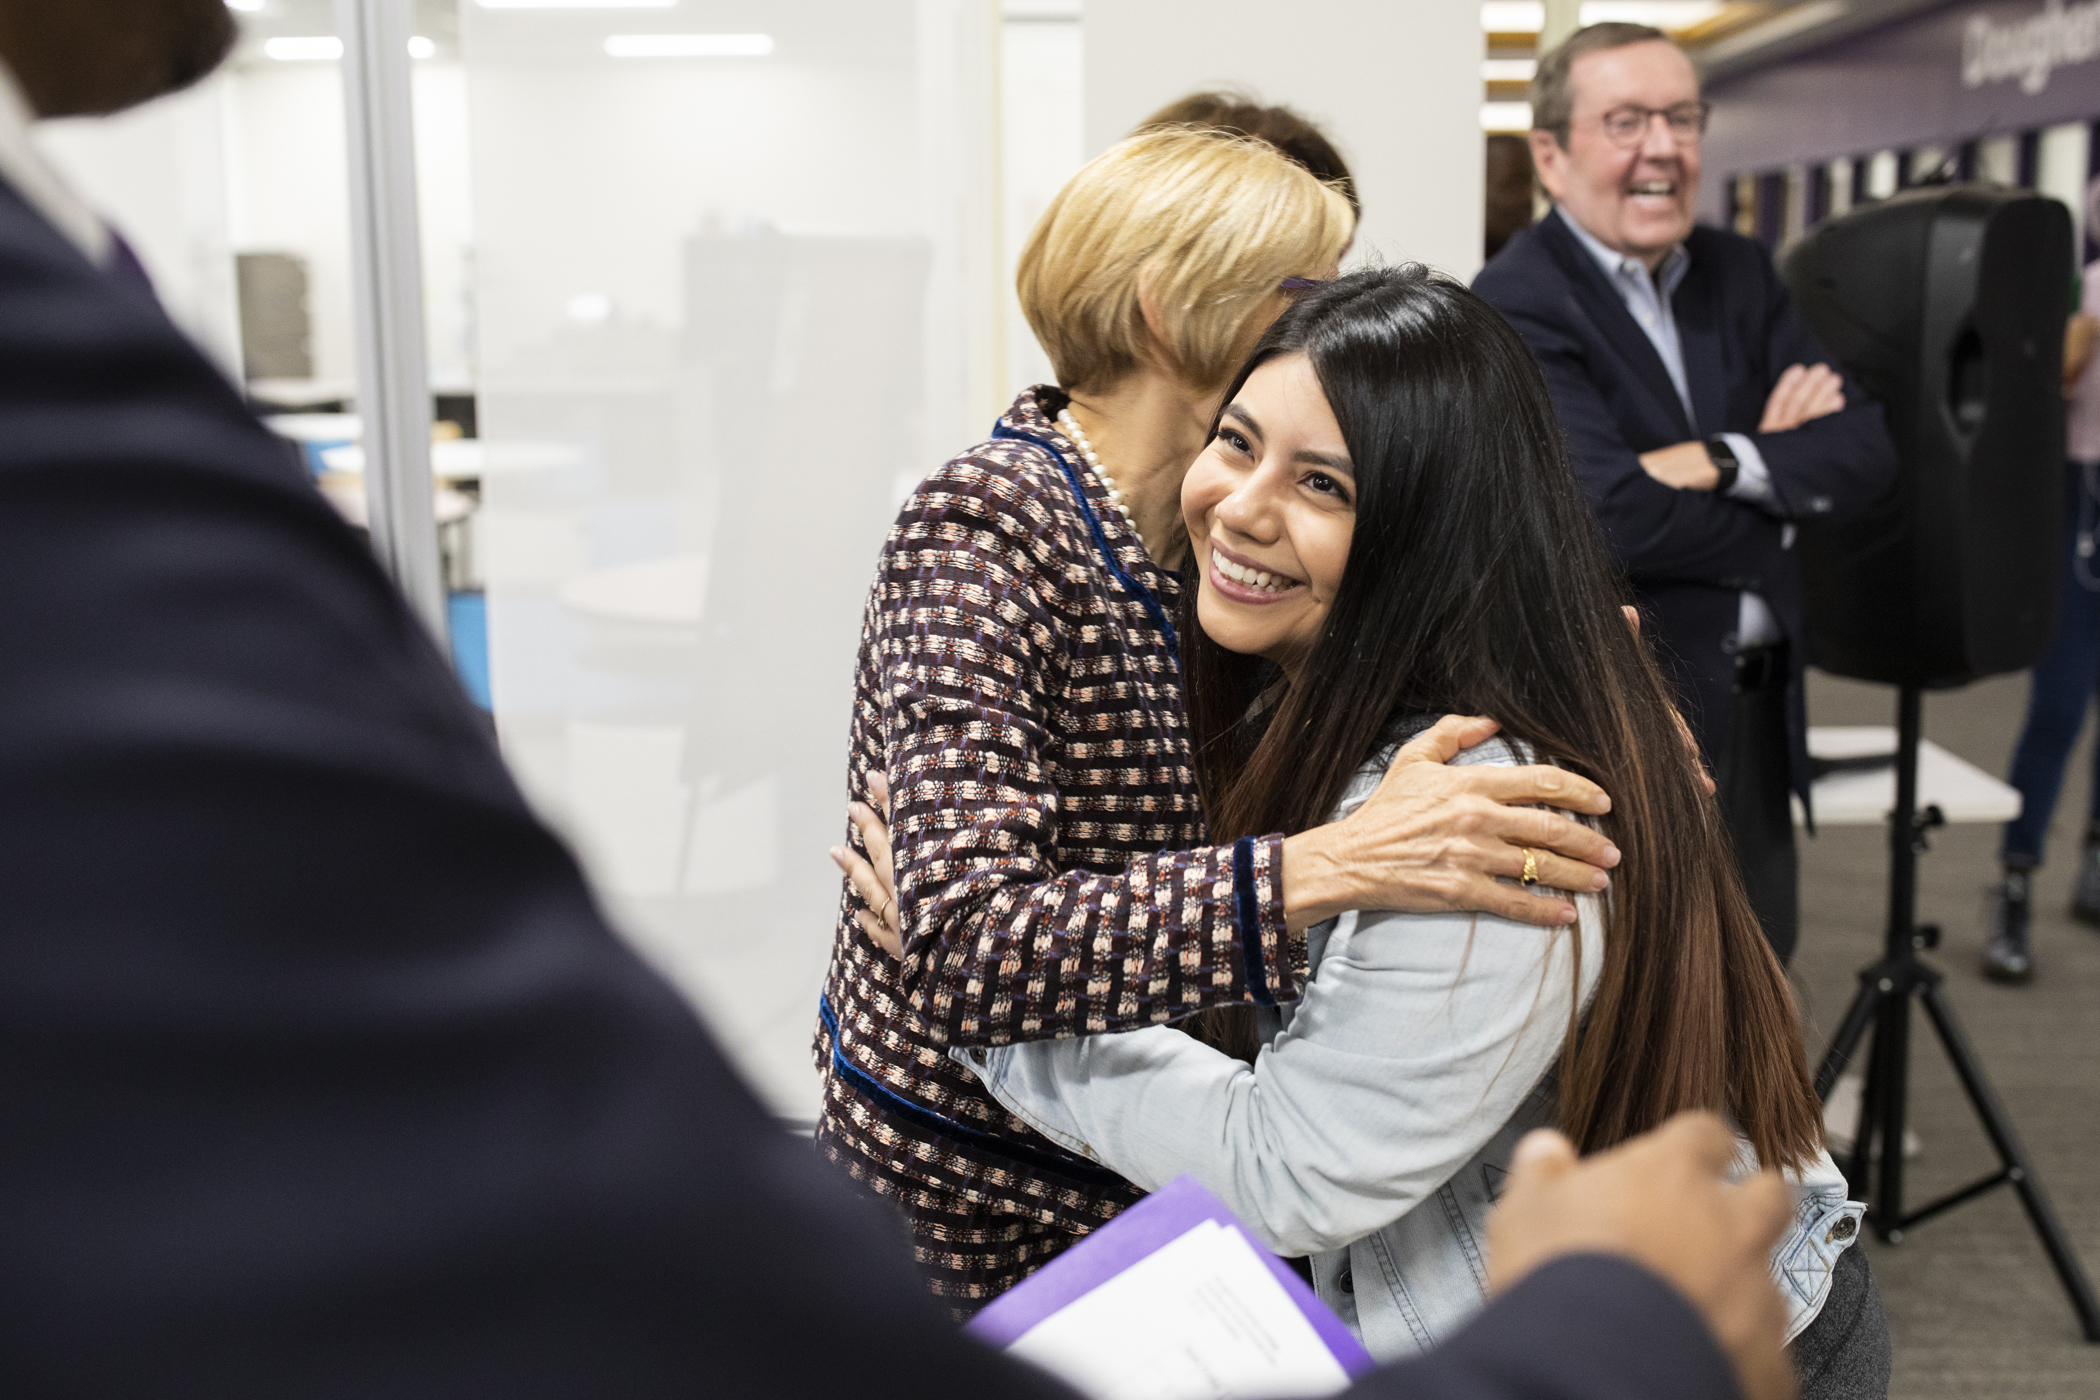 Andrea Mina Rodriguez hugs President Julie Sullivan after being named a recipient of a full tuition scholarship to pursue her bachelor's degree at St. Thomas.